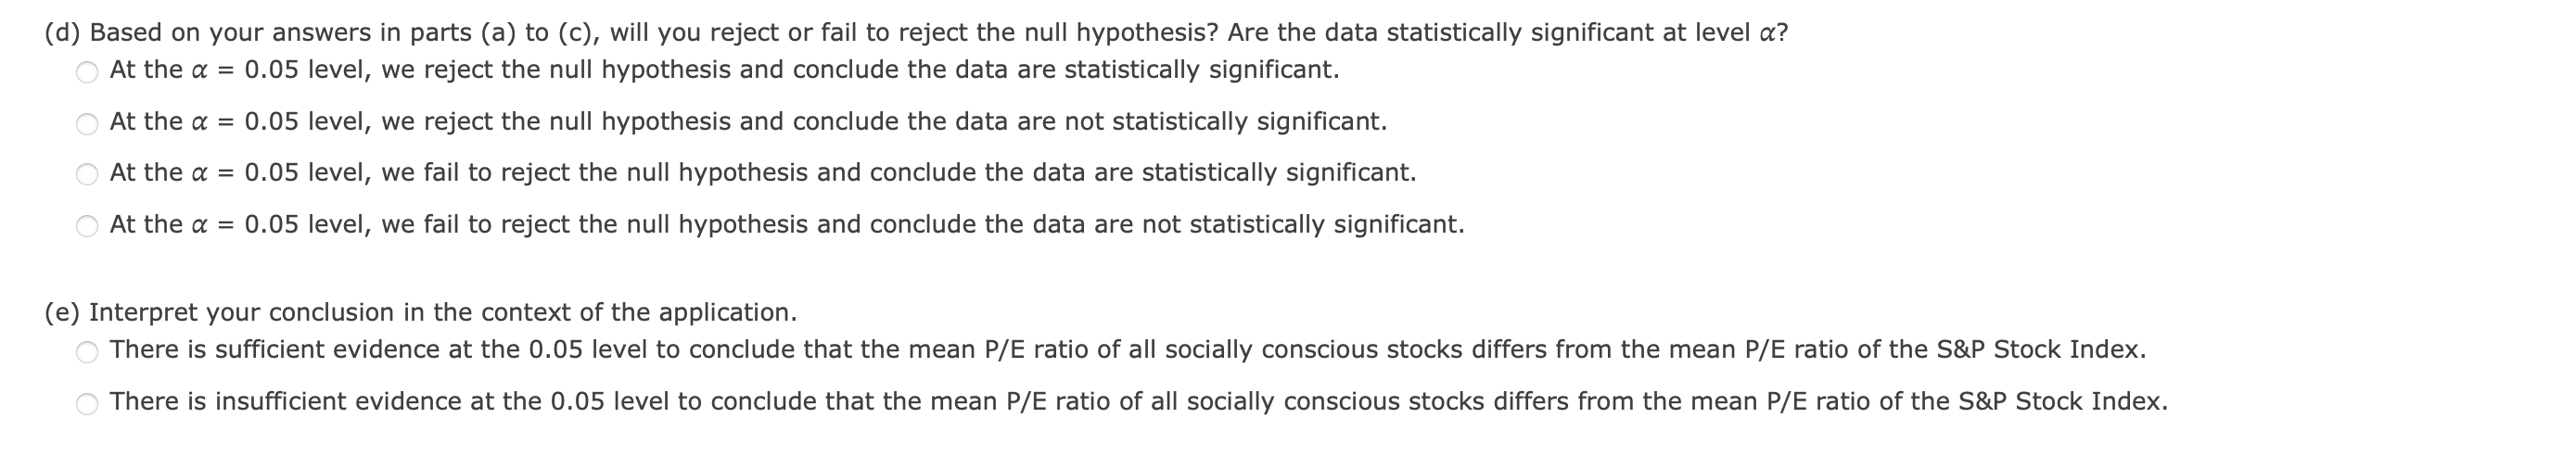 (d) Based on your answers in parts (a) to (c), will you reject or fail to reject the null hypothesis? Are the data statistica